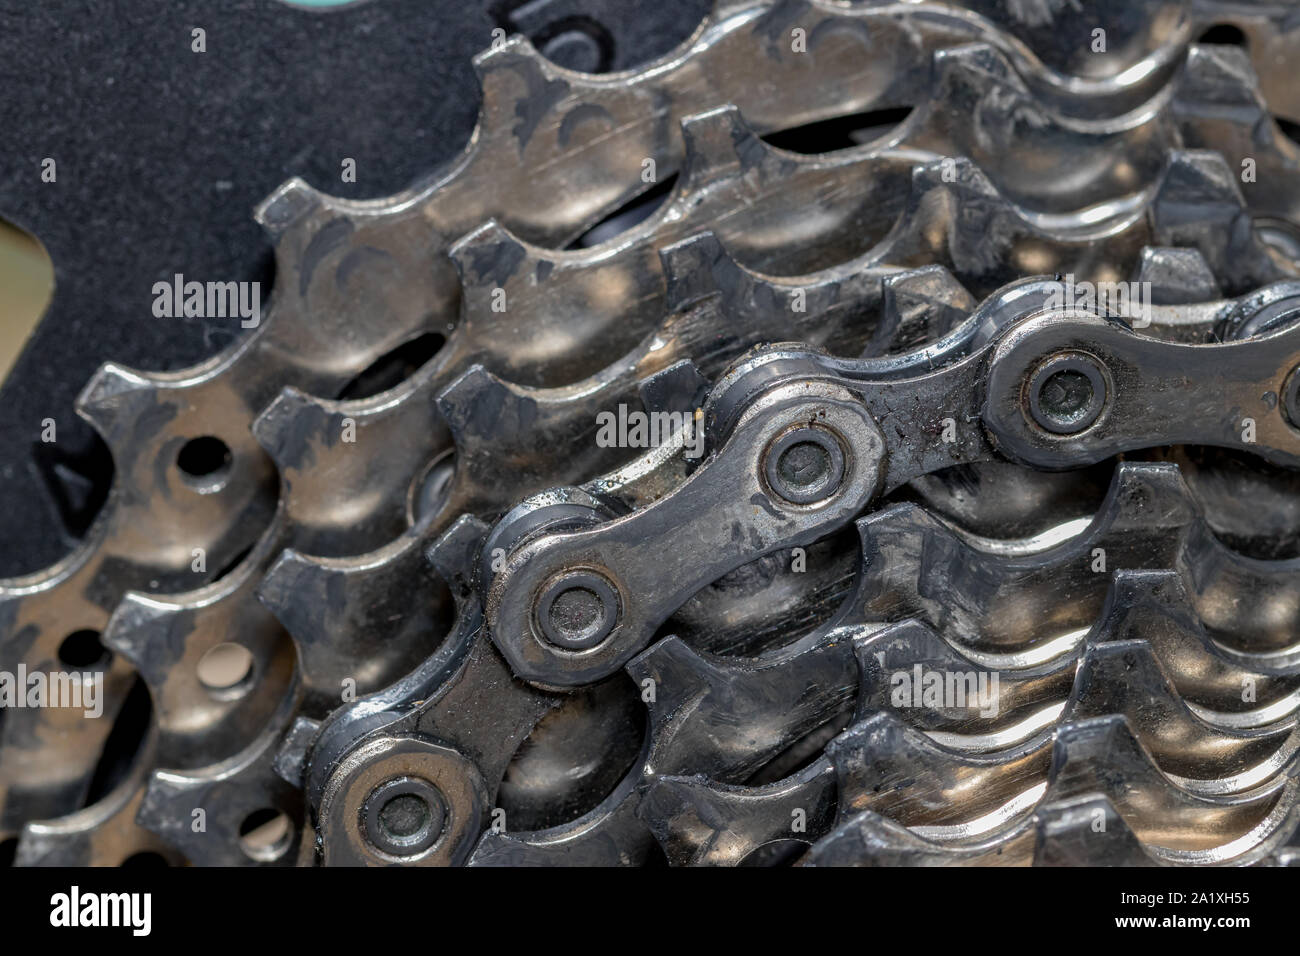 Closeup detail of dirty bicycle cassette gears and chain links covered with dirt, oil, and debris. Concept of cycling maintenance and repair Stock Photo